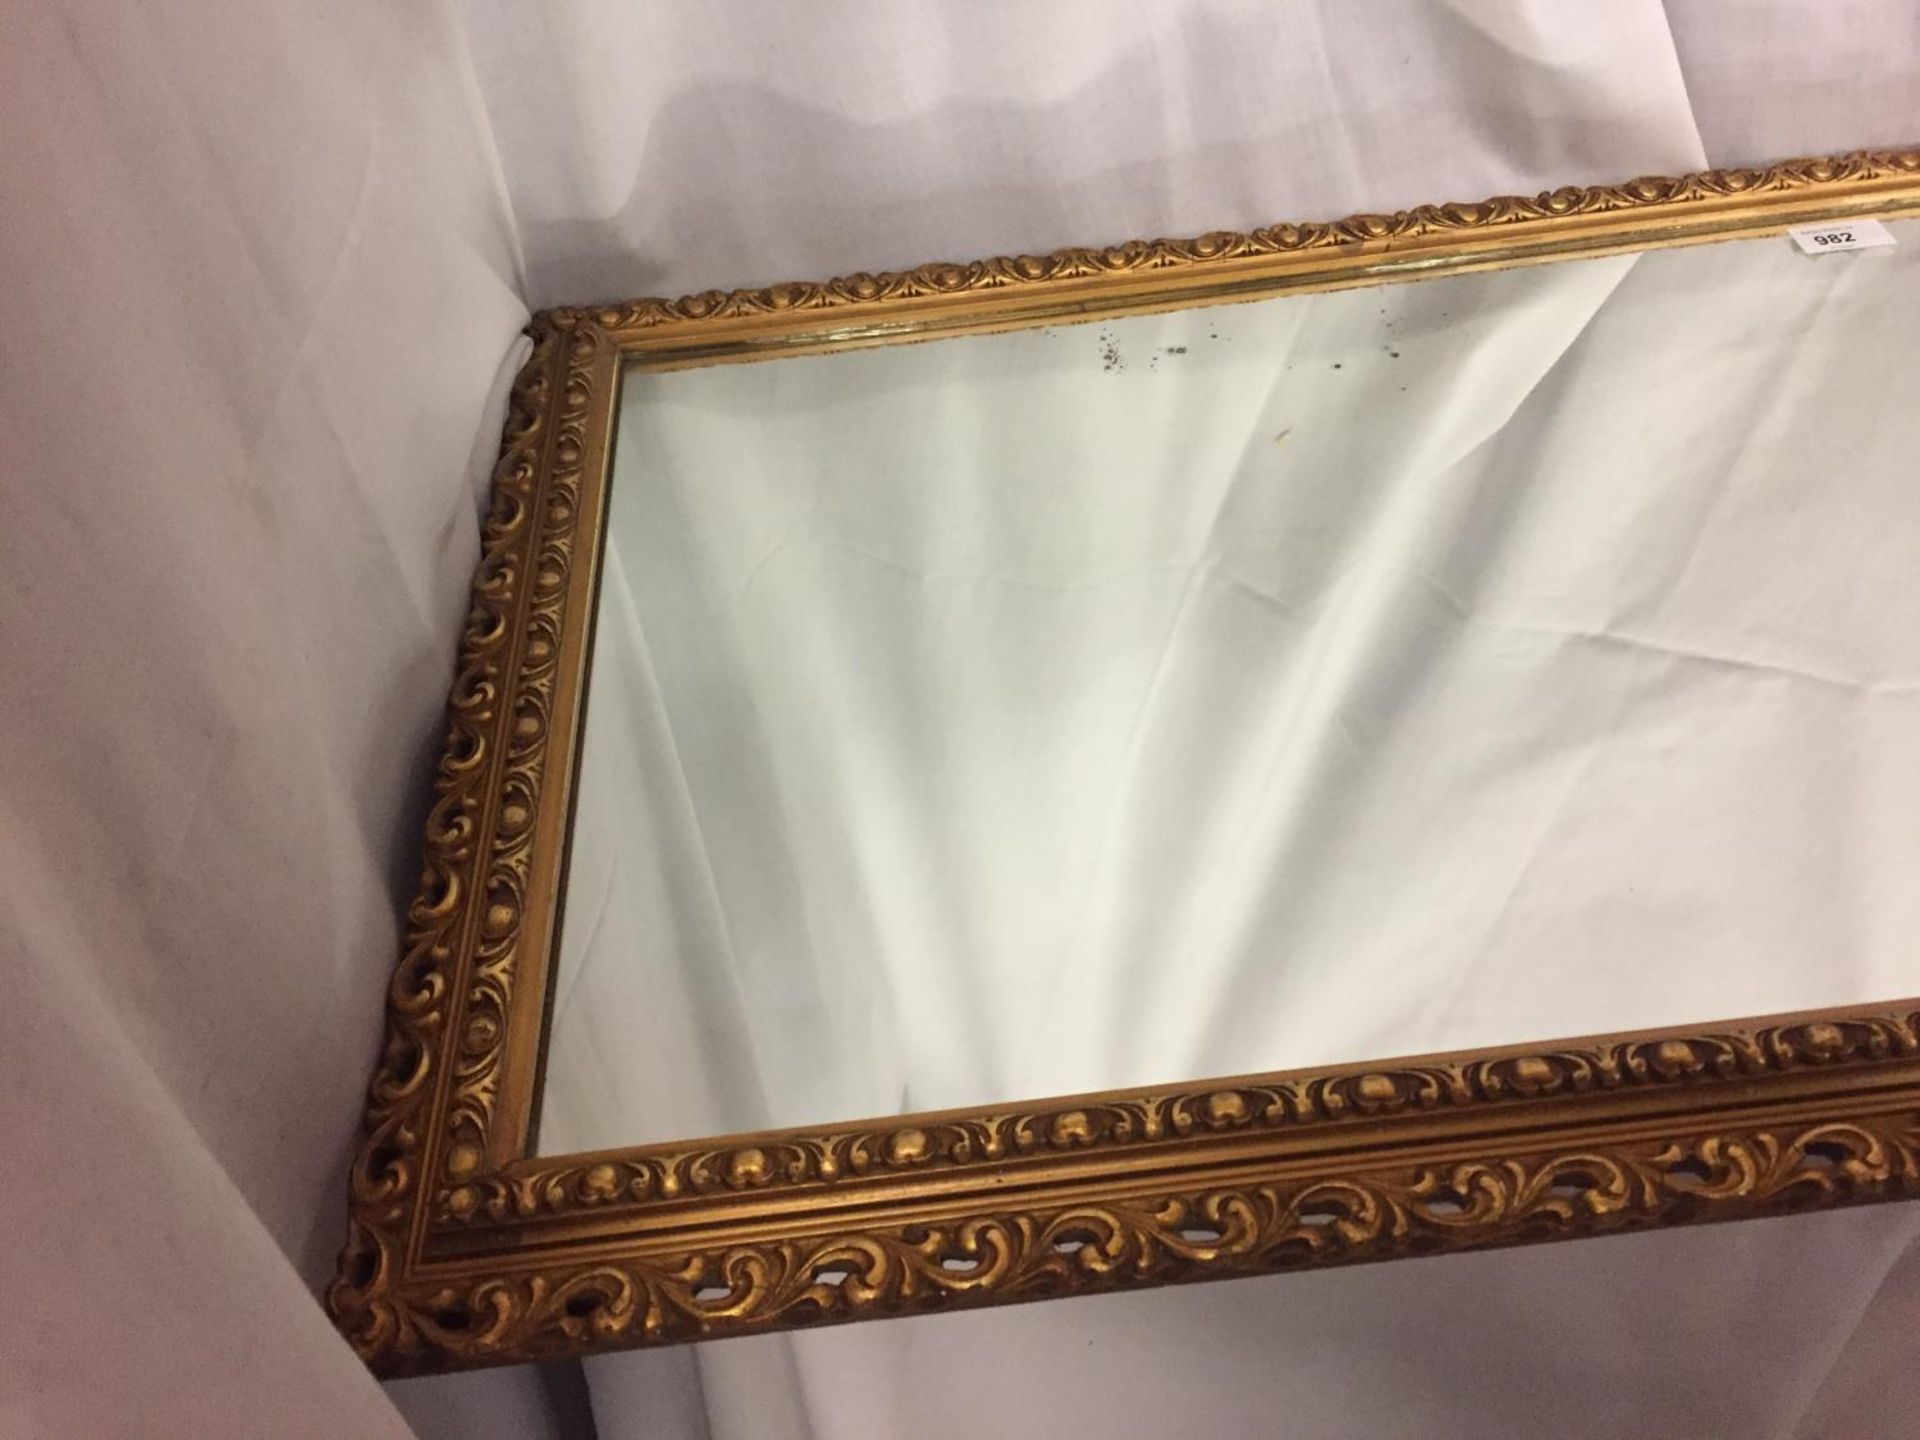 A GILT FRAMED MIRROR SIZE 27 INCHES X 19 INCHES - Image 3 of 4